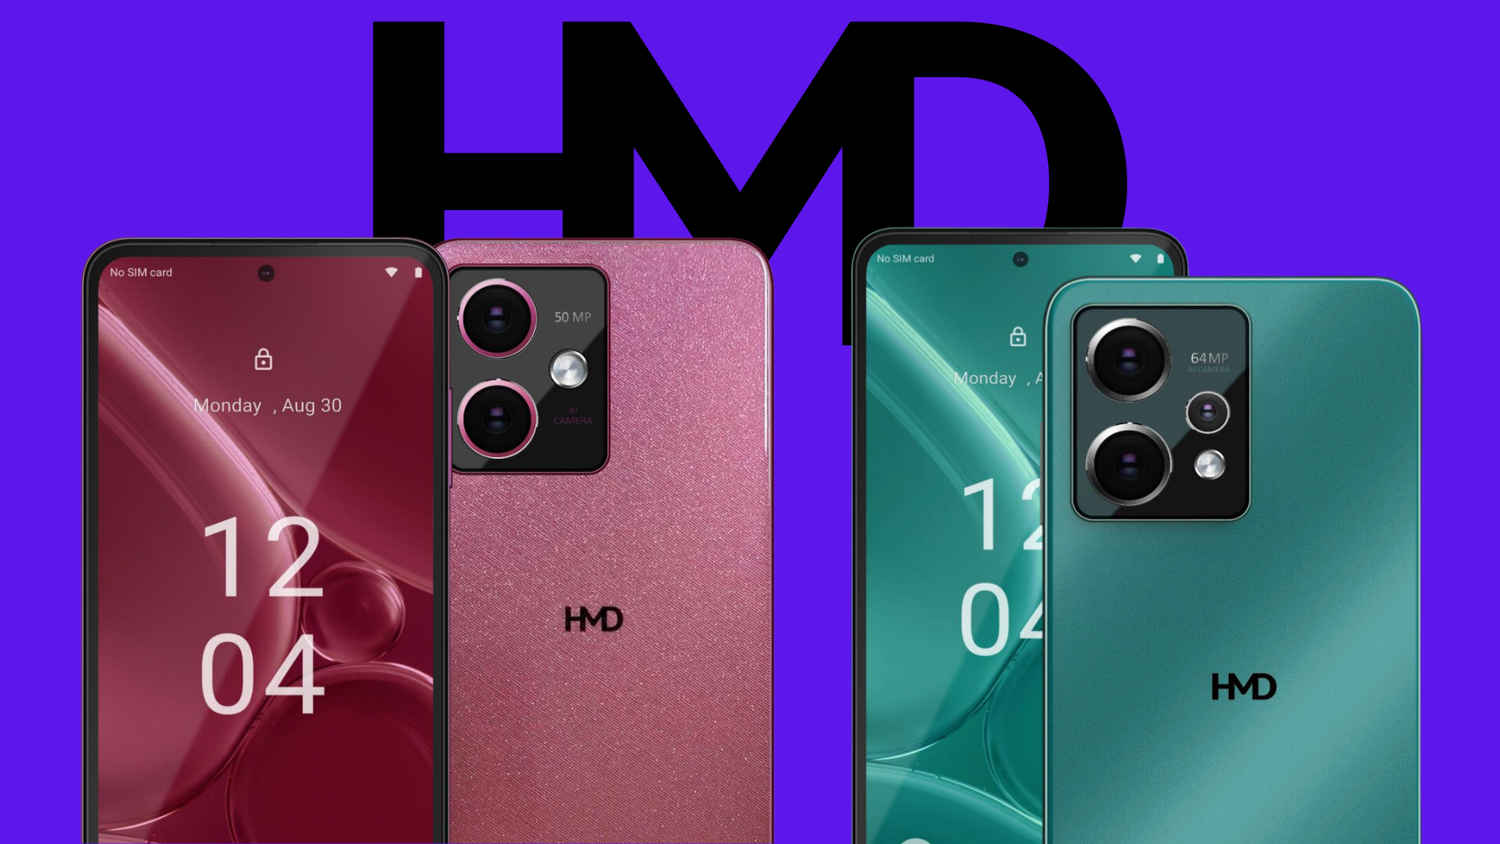 HMD Crest and HMD Crest Max launched in India: Price, specifications, and more